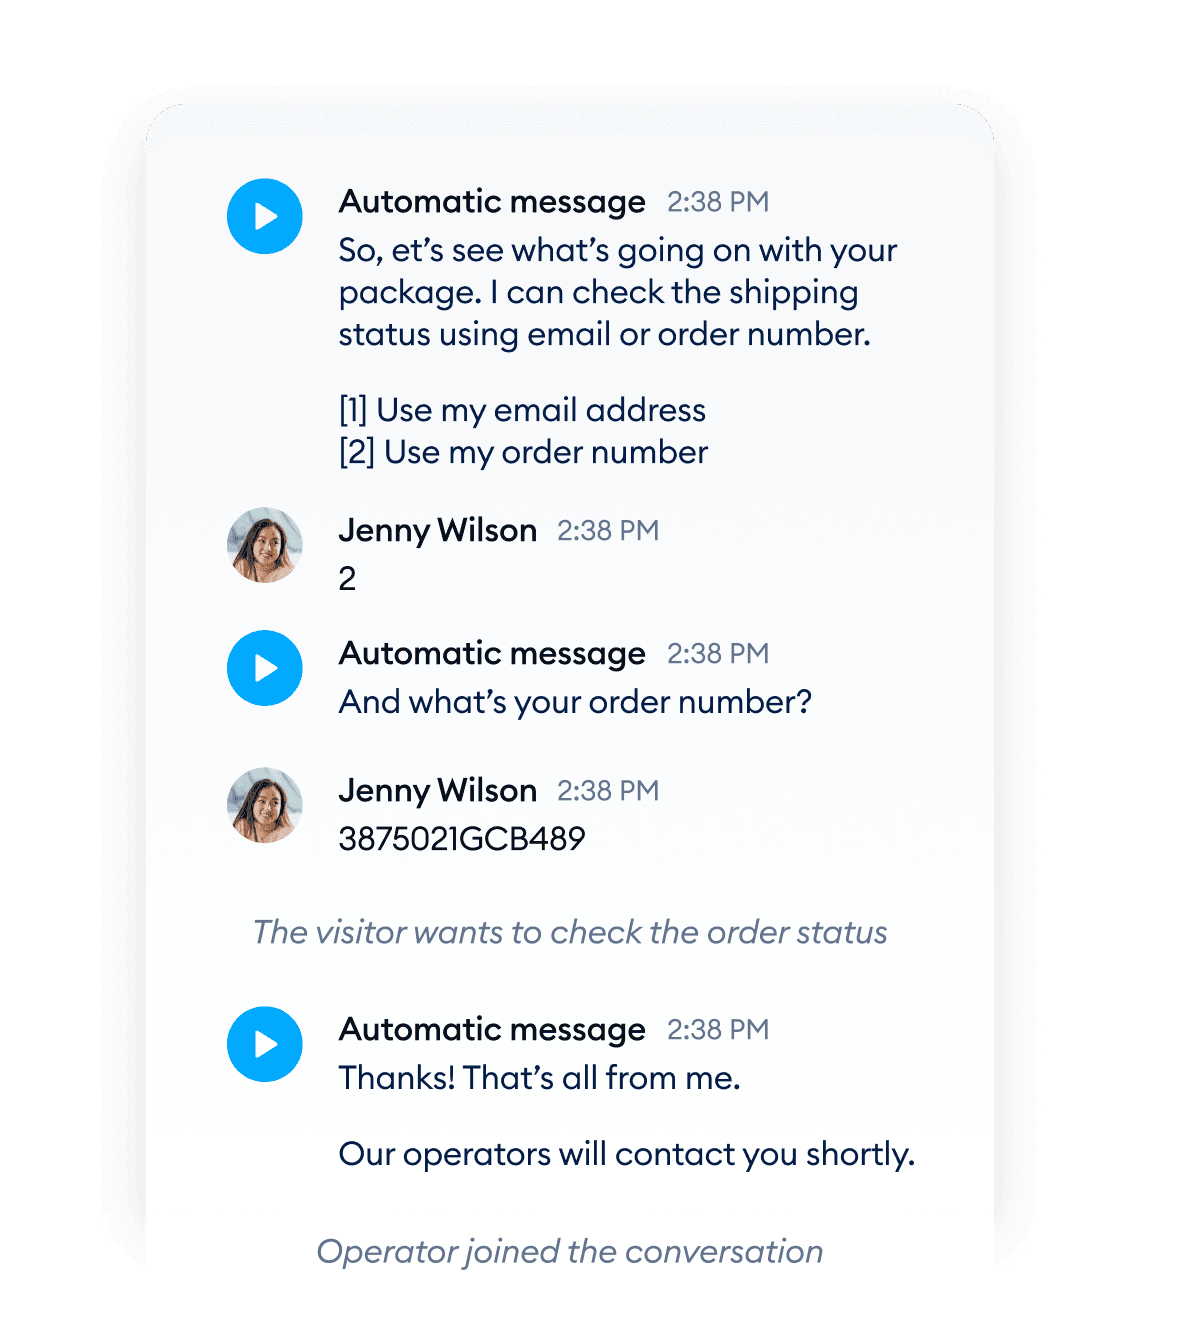 Automate the team’s work